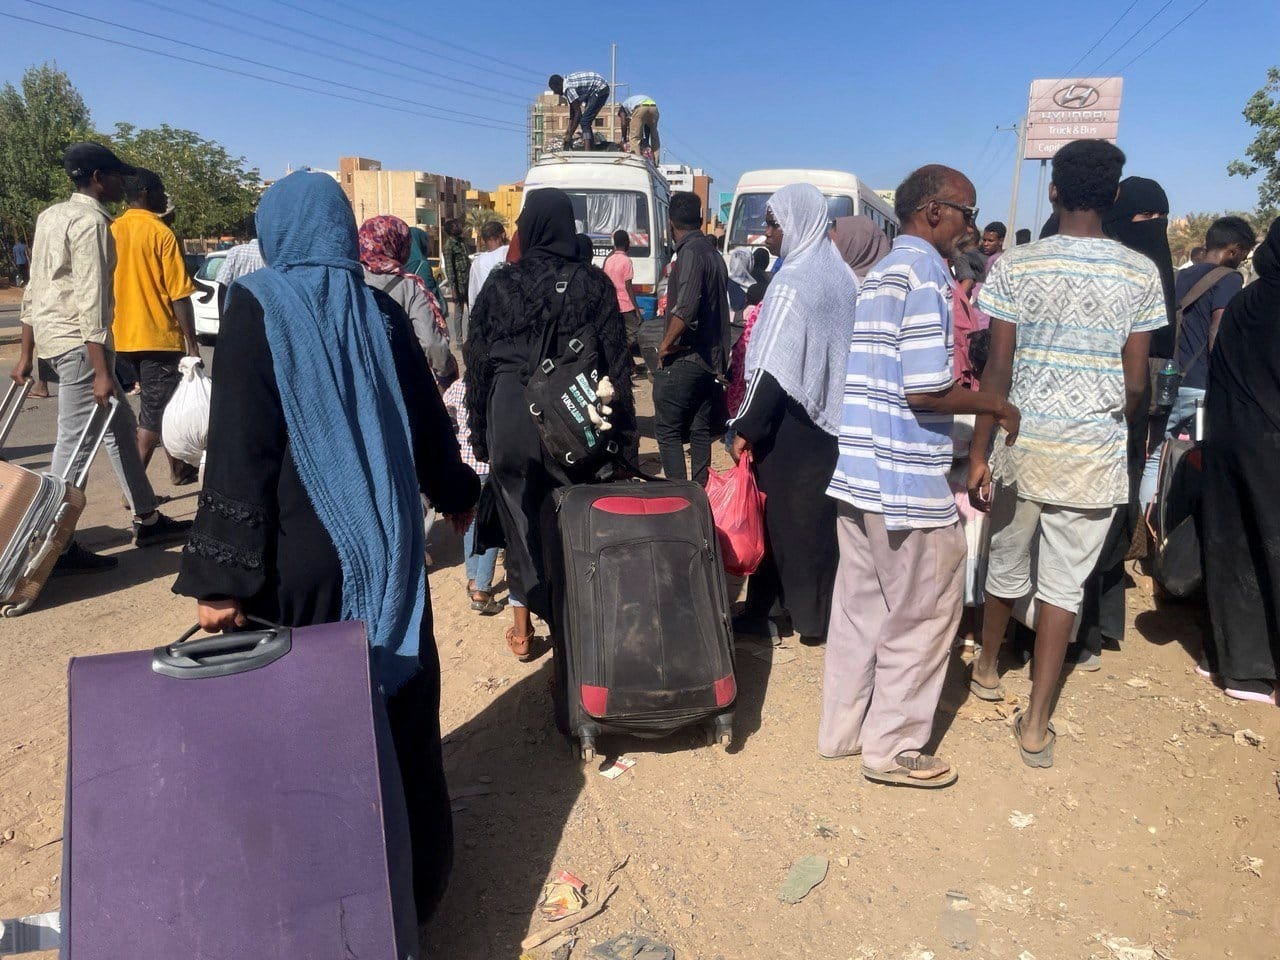 People fleeing clashes between the paramilitary Rapid Support Forces and the army gather at the bus station in Khartoum, Sudan, April 19, 2023. (OSV News photo/El-Tayeb Siddig, Reuters)